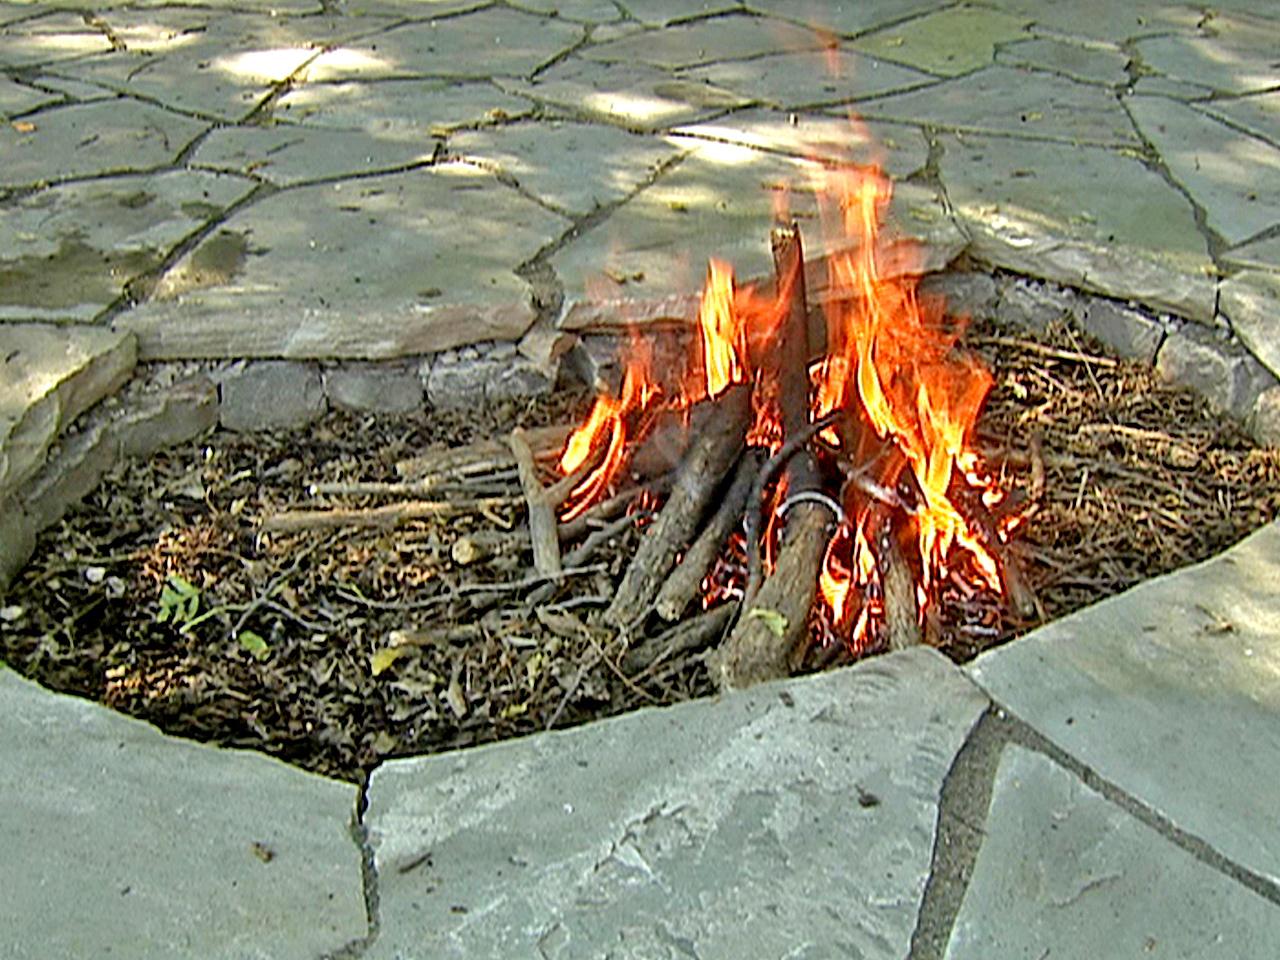 Outdoor Fire Pits And Pit Safety, Are Fire Pits Illegal